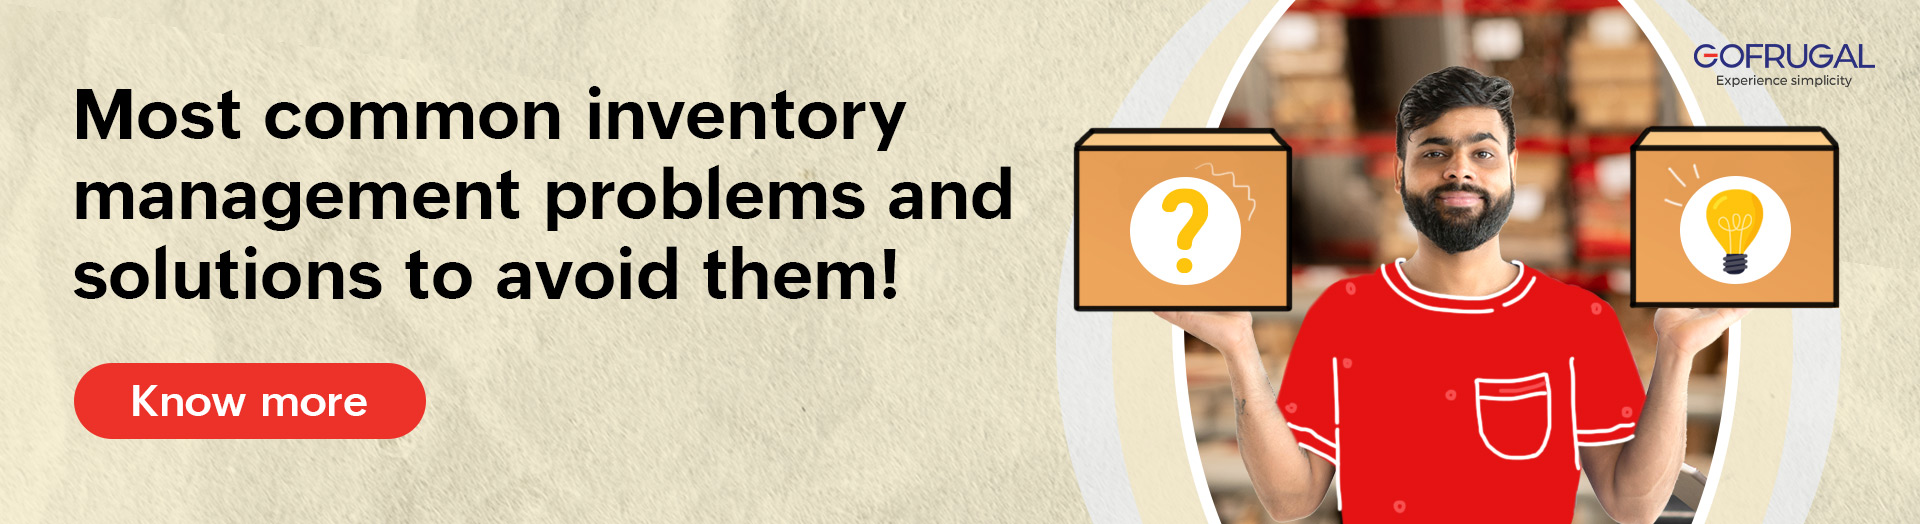 Most common inventory management problems and solutions